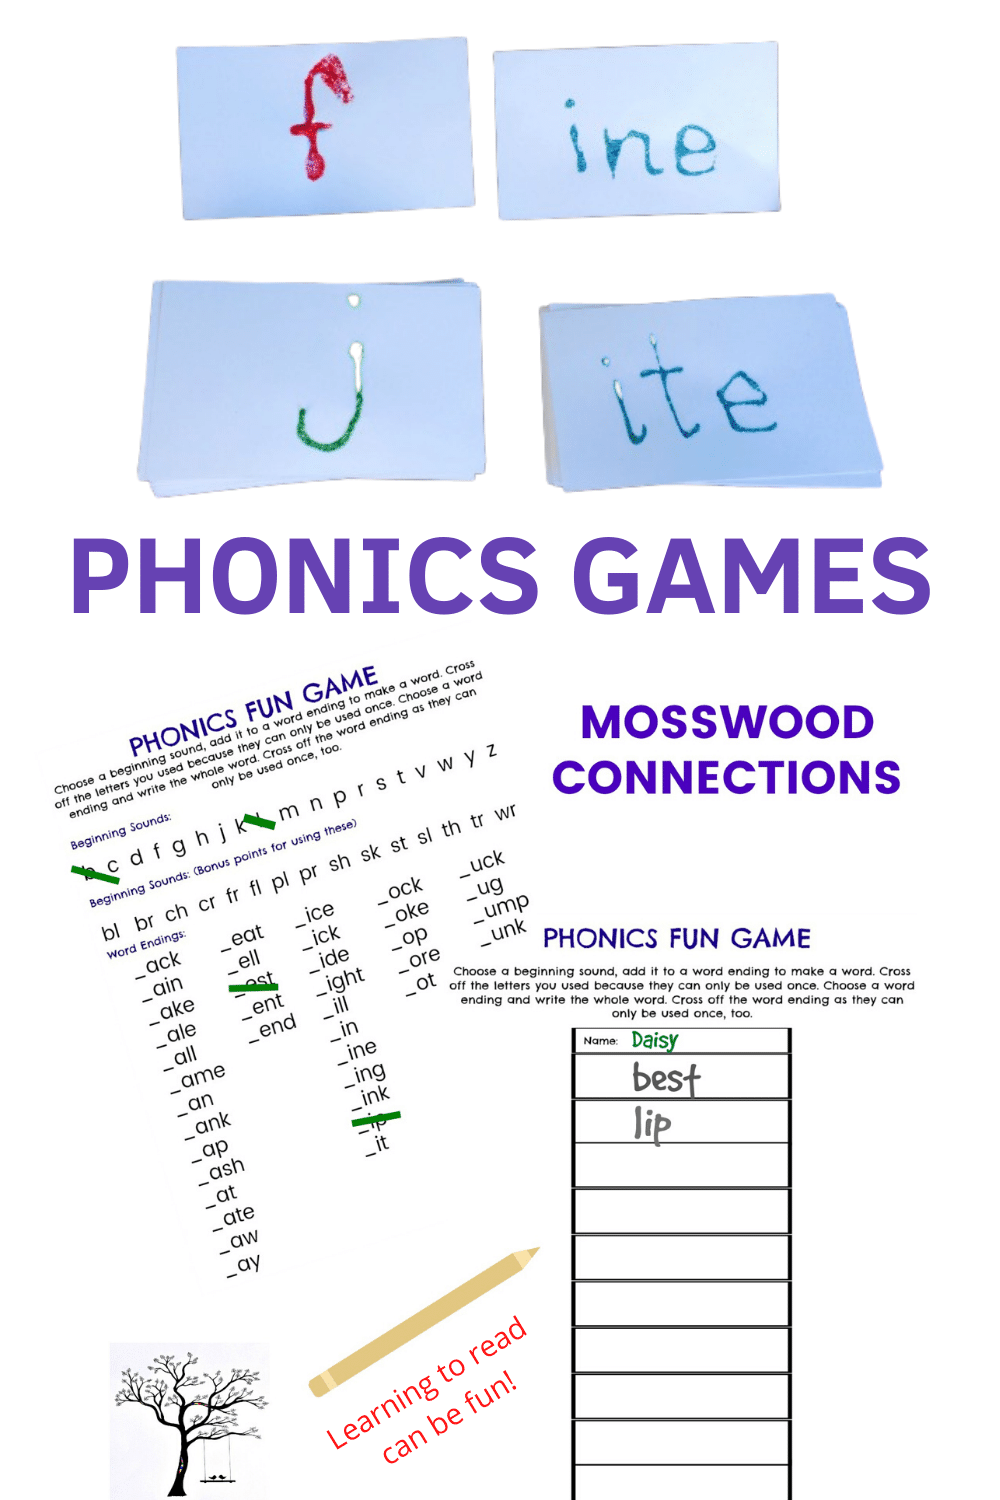 Ridiculous Reading Phonics Game #mosswoodconnections #education #phonics #homeschooling #reading